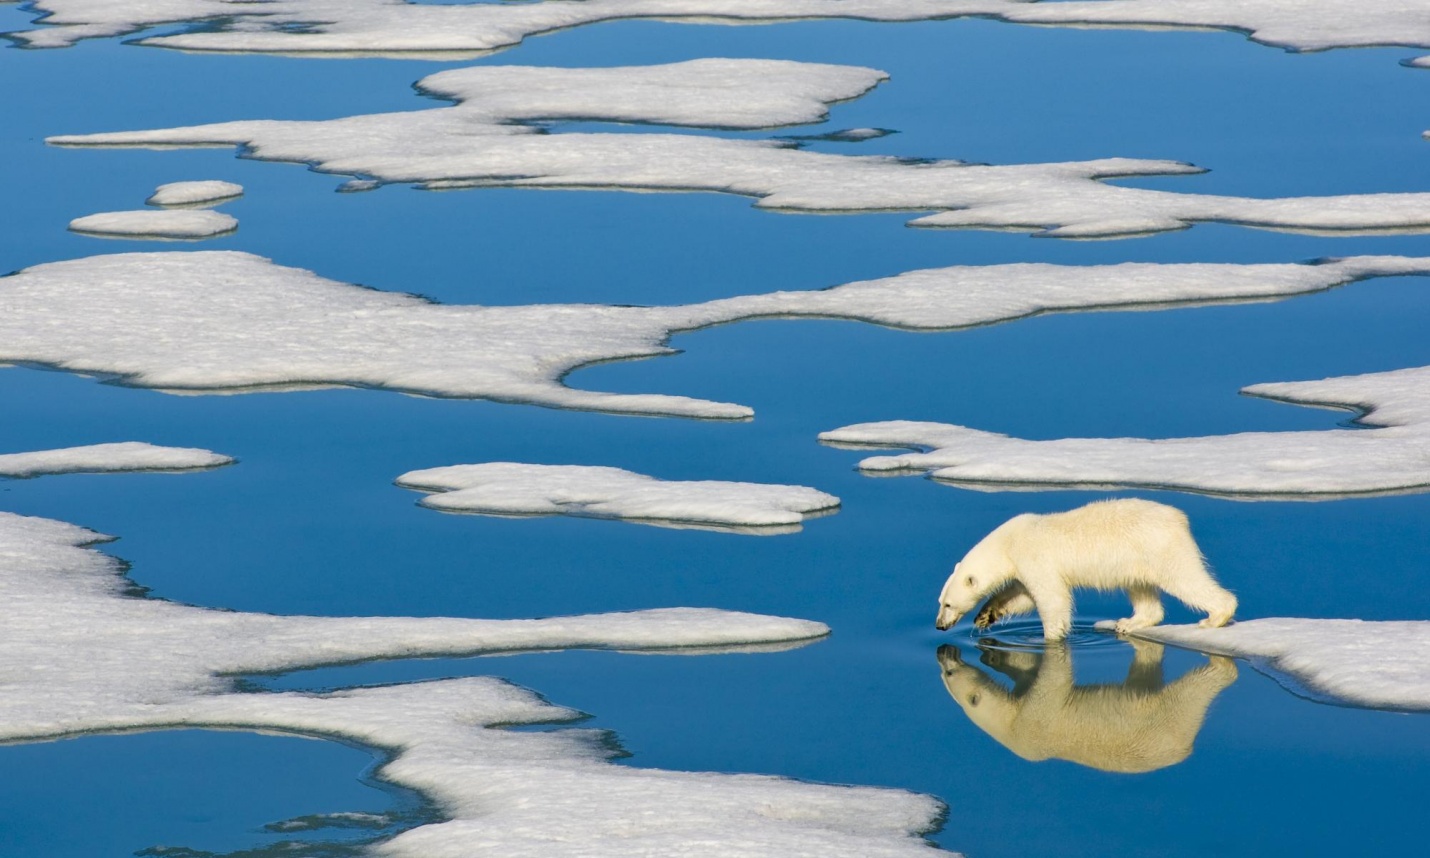 A polar bear in the arctic wilderness of the Svalbard Islands in the Arctic Ocean. Photograph: Ralph Lee Hopkins/Corbis